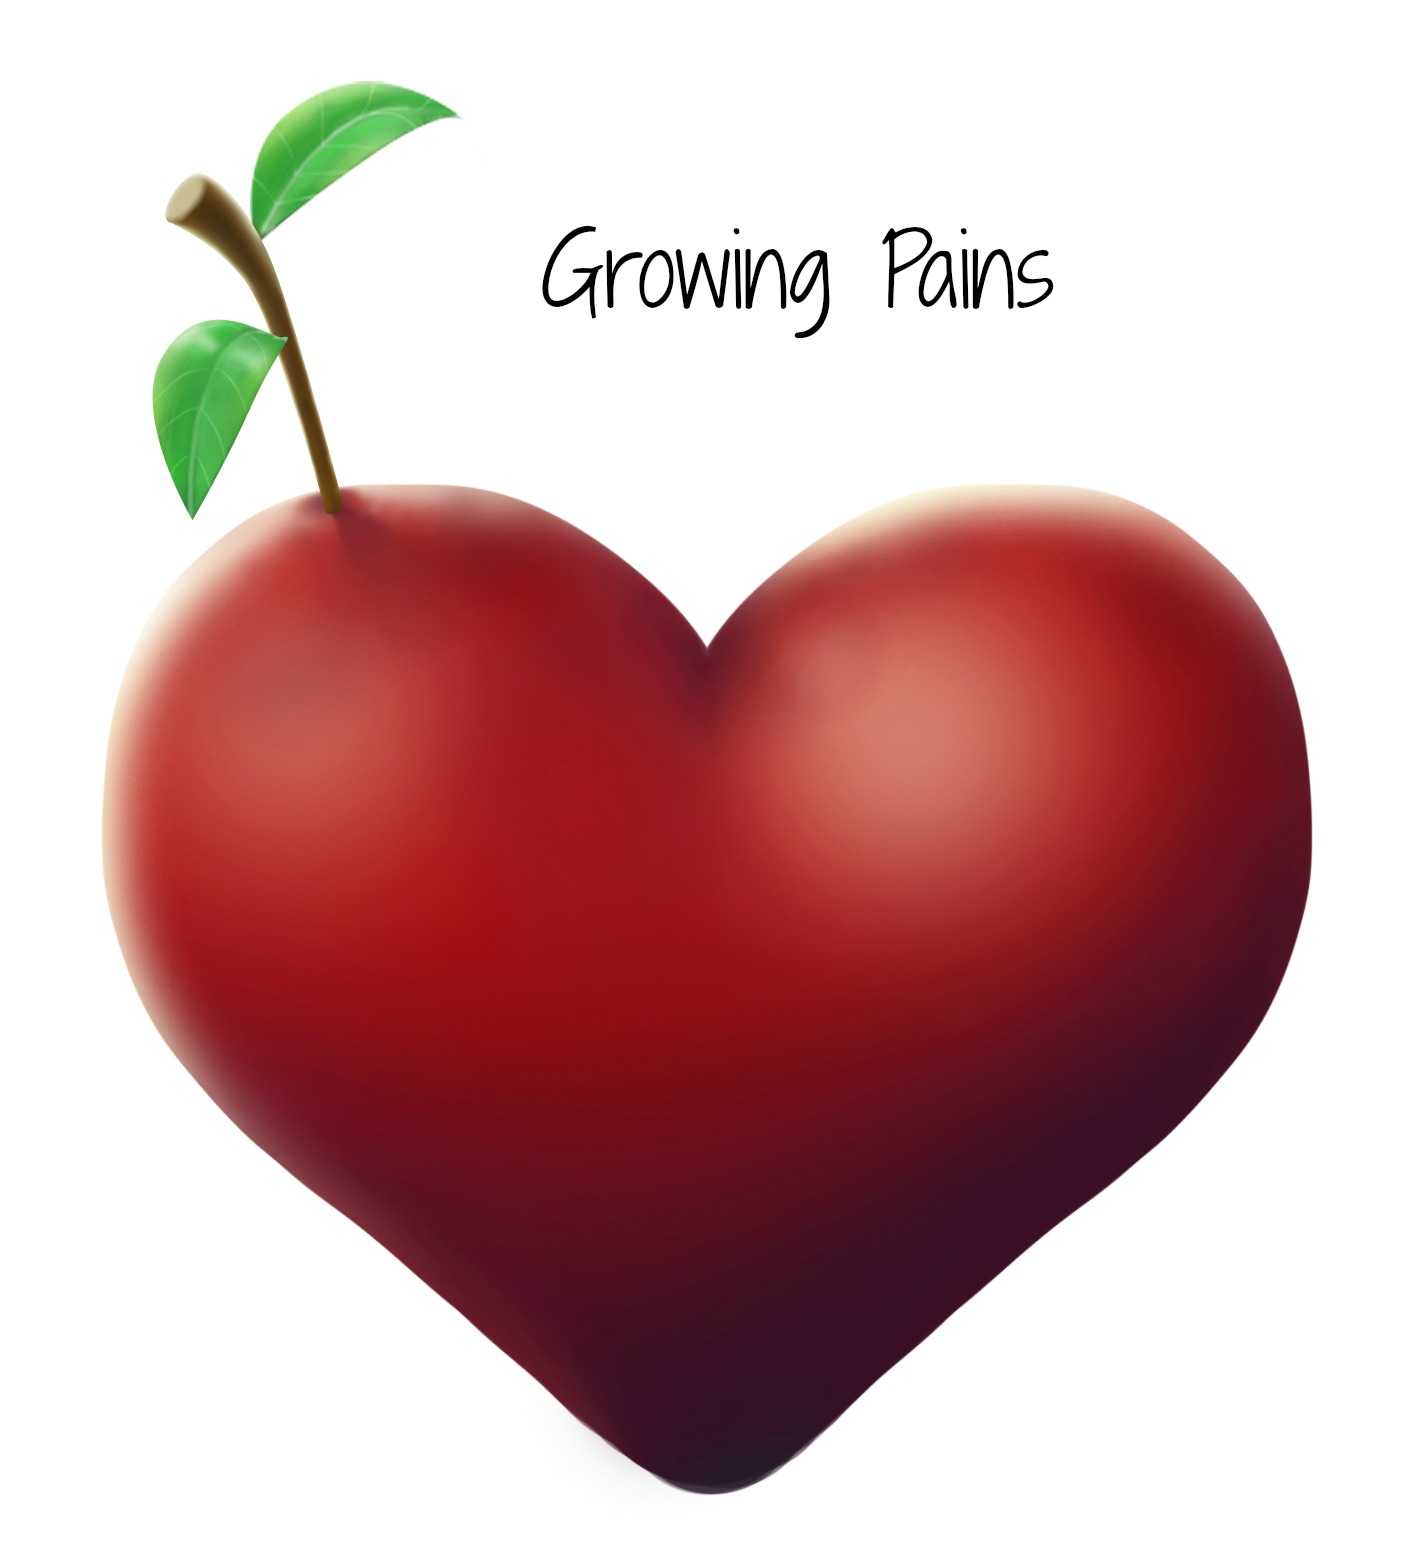 Therapy Growing Pains - Heart Shaped Apple